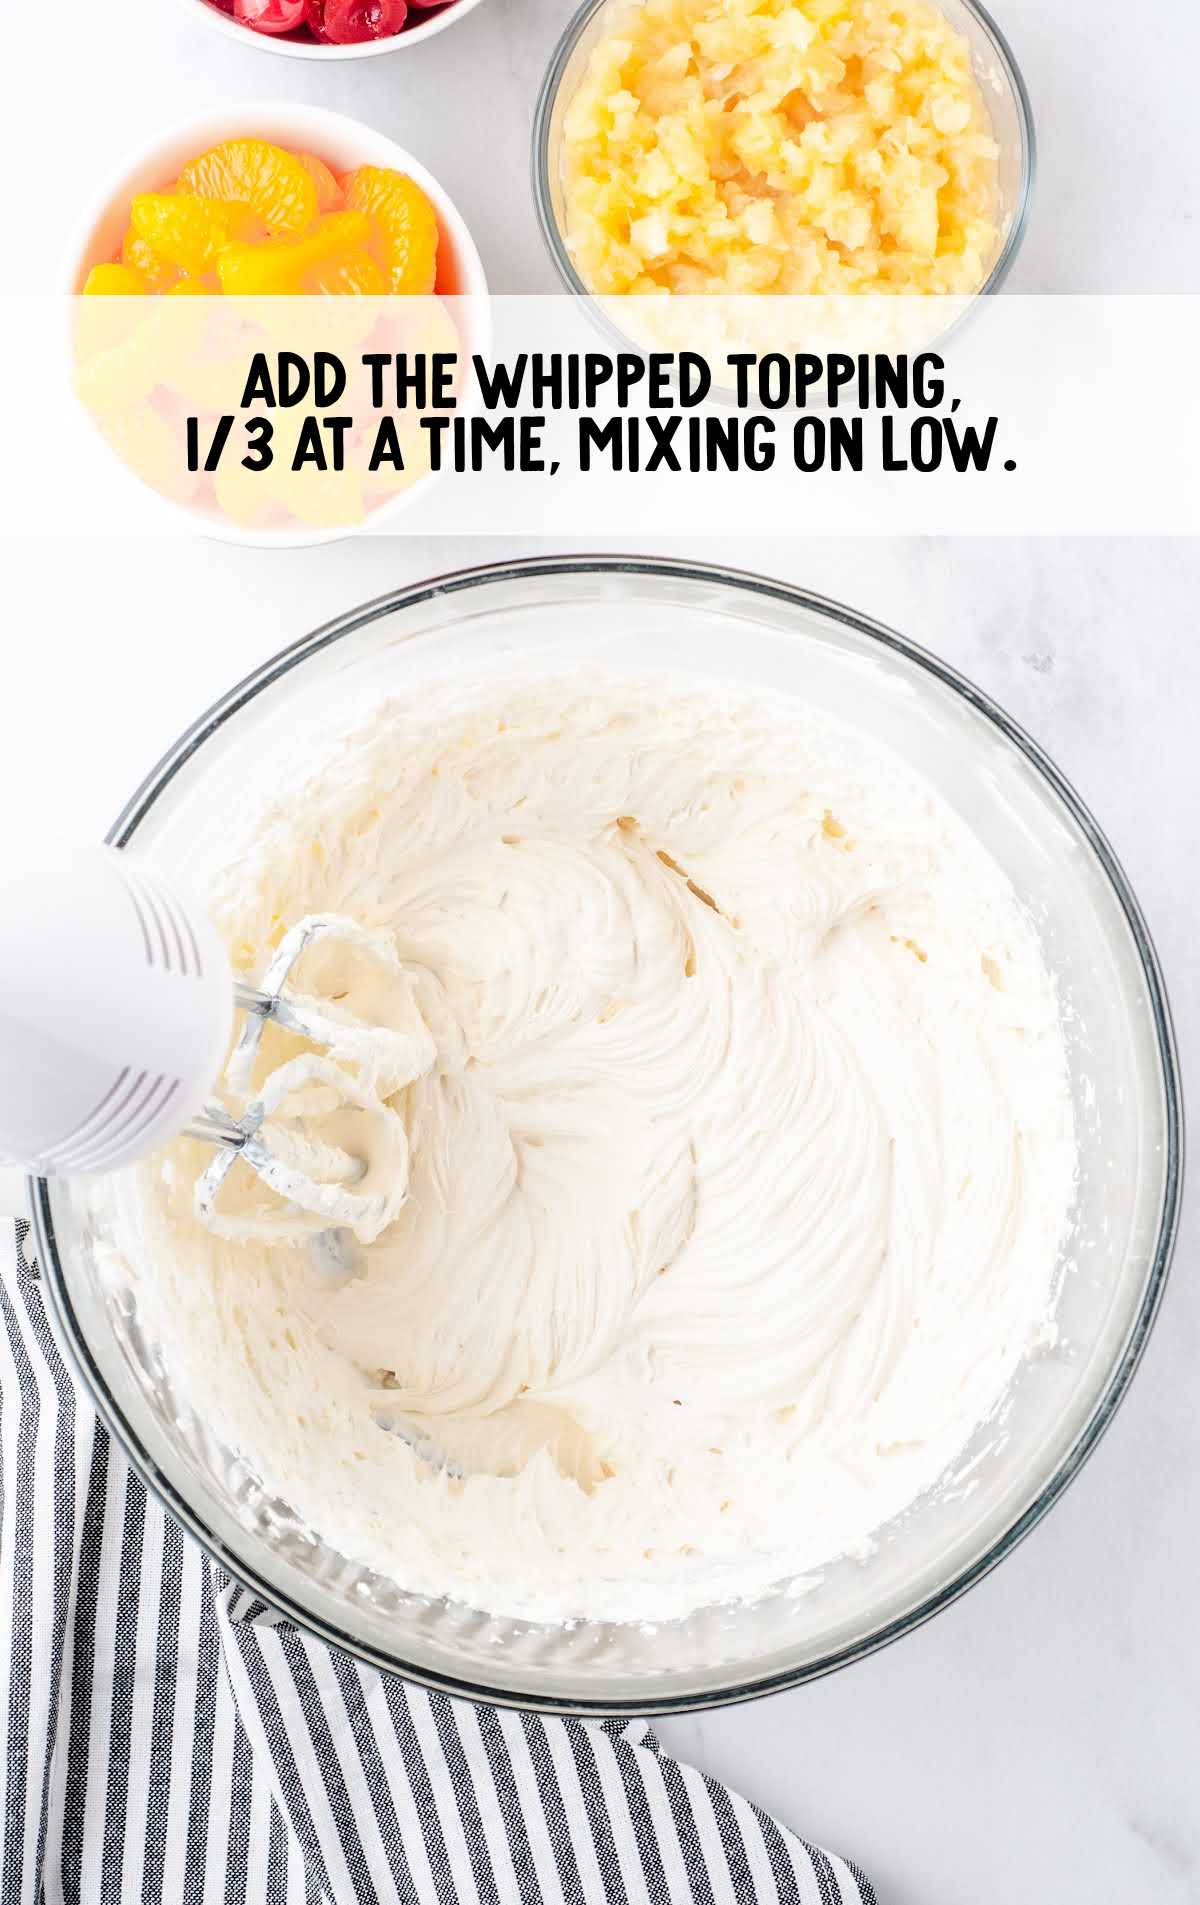 whipped topping added to the cream cheese and blended together